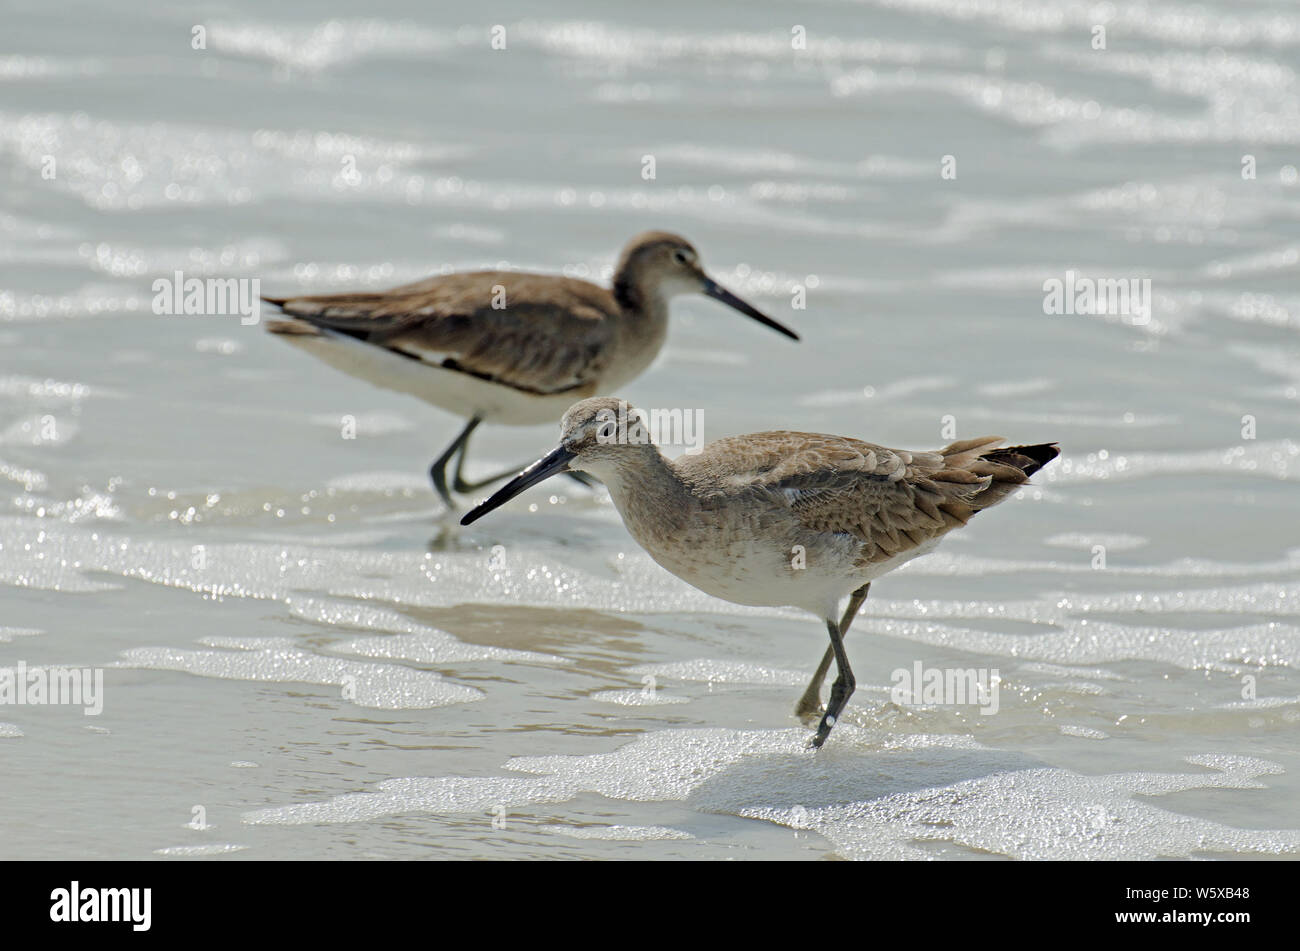 Pair of American short-billed dowitcher sandpipers wading and hunting in sea foam and sandy colored water along the shore of Florida's Gulf Coast. Stock Photo